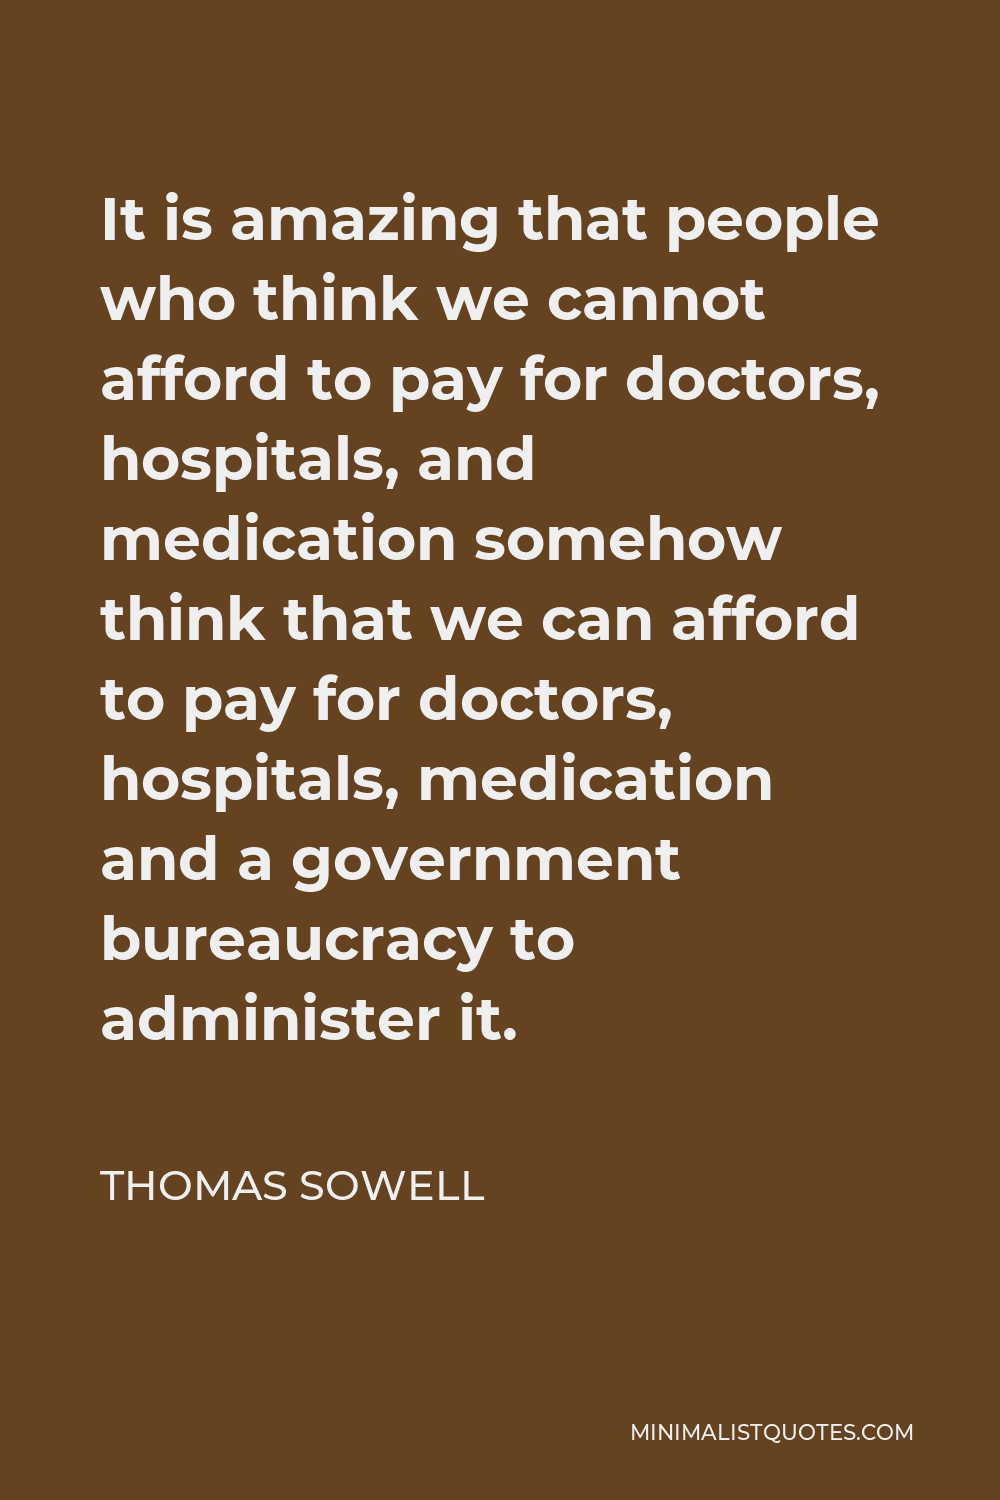 Thomas Sowell Quote - It is amazing that people who think we cannot afford to pay for doctors, hospitals, and medication somehow think that we can afford to pay for doctors, hospitals, medication and a government bureaucracy to administer it.